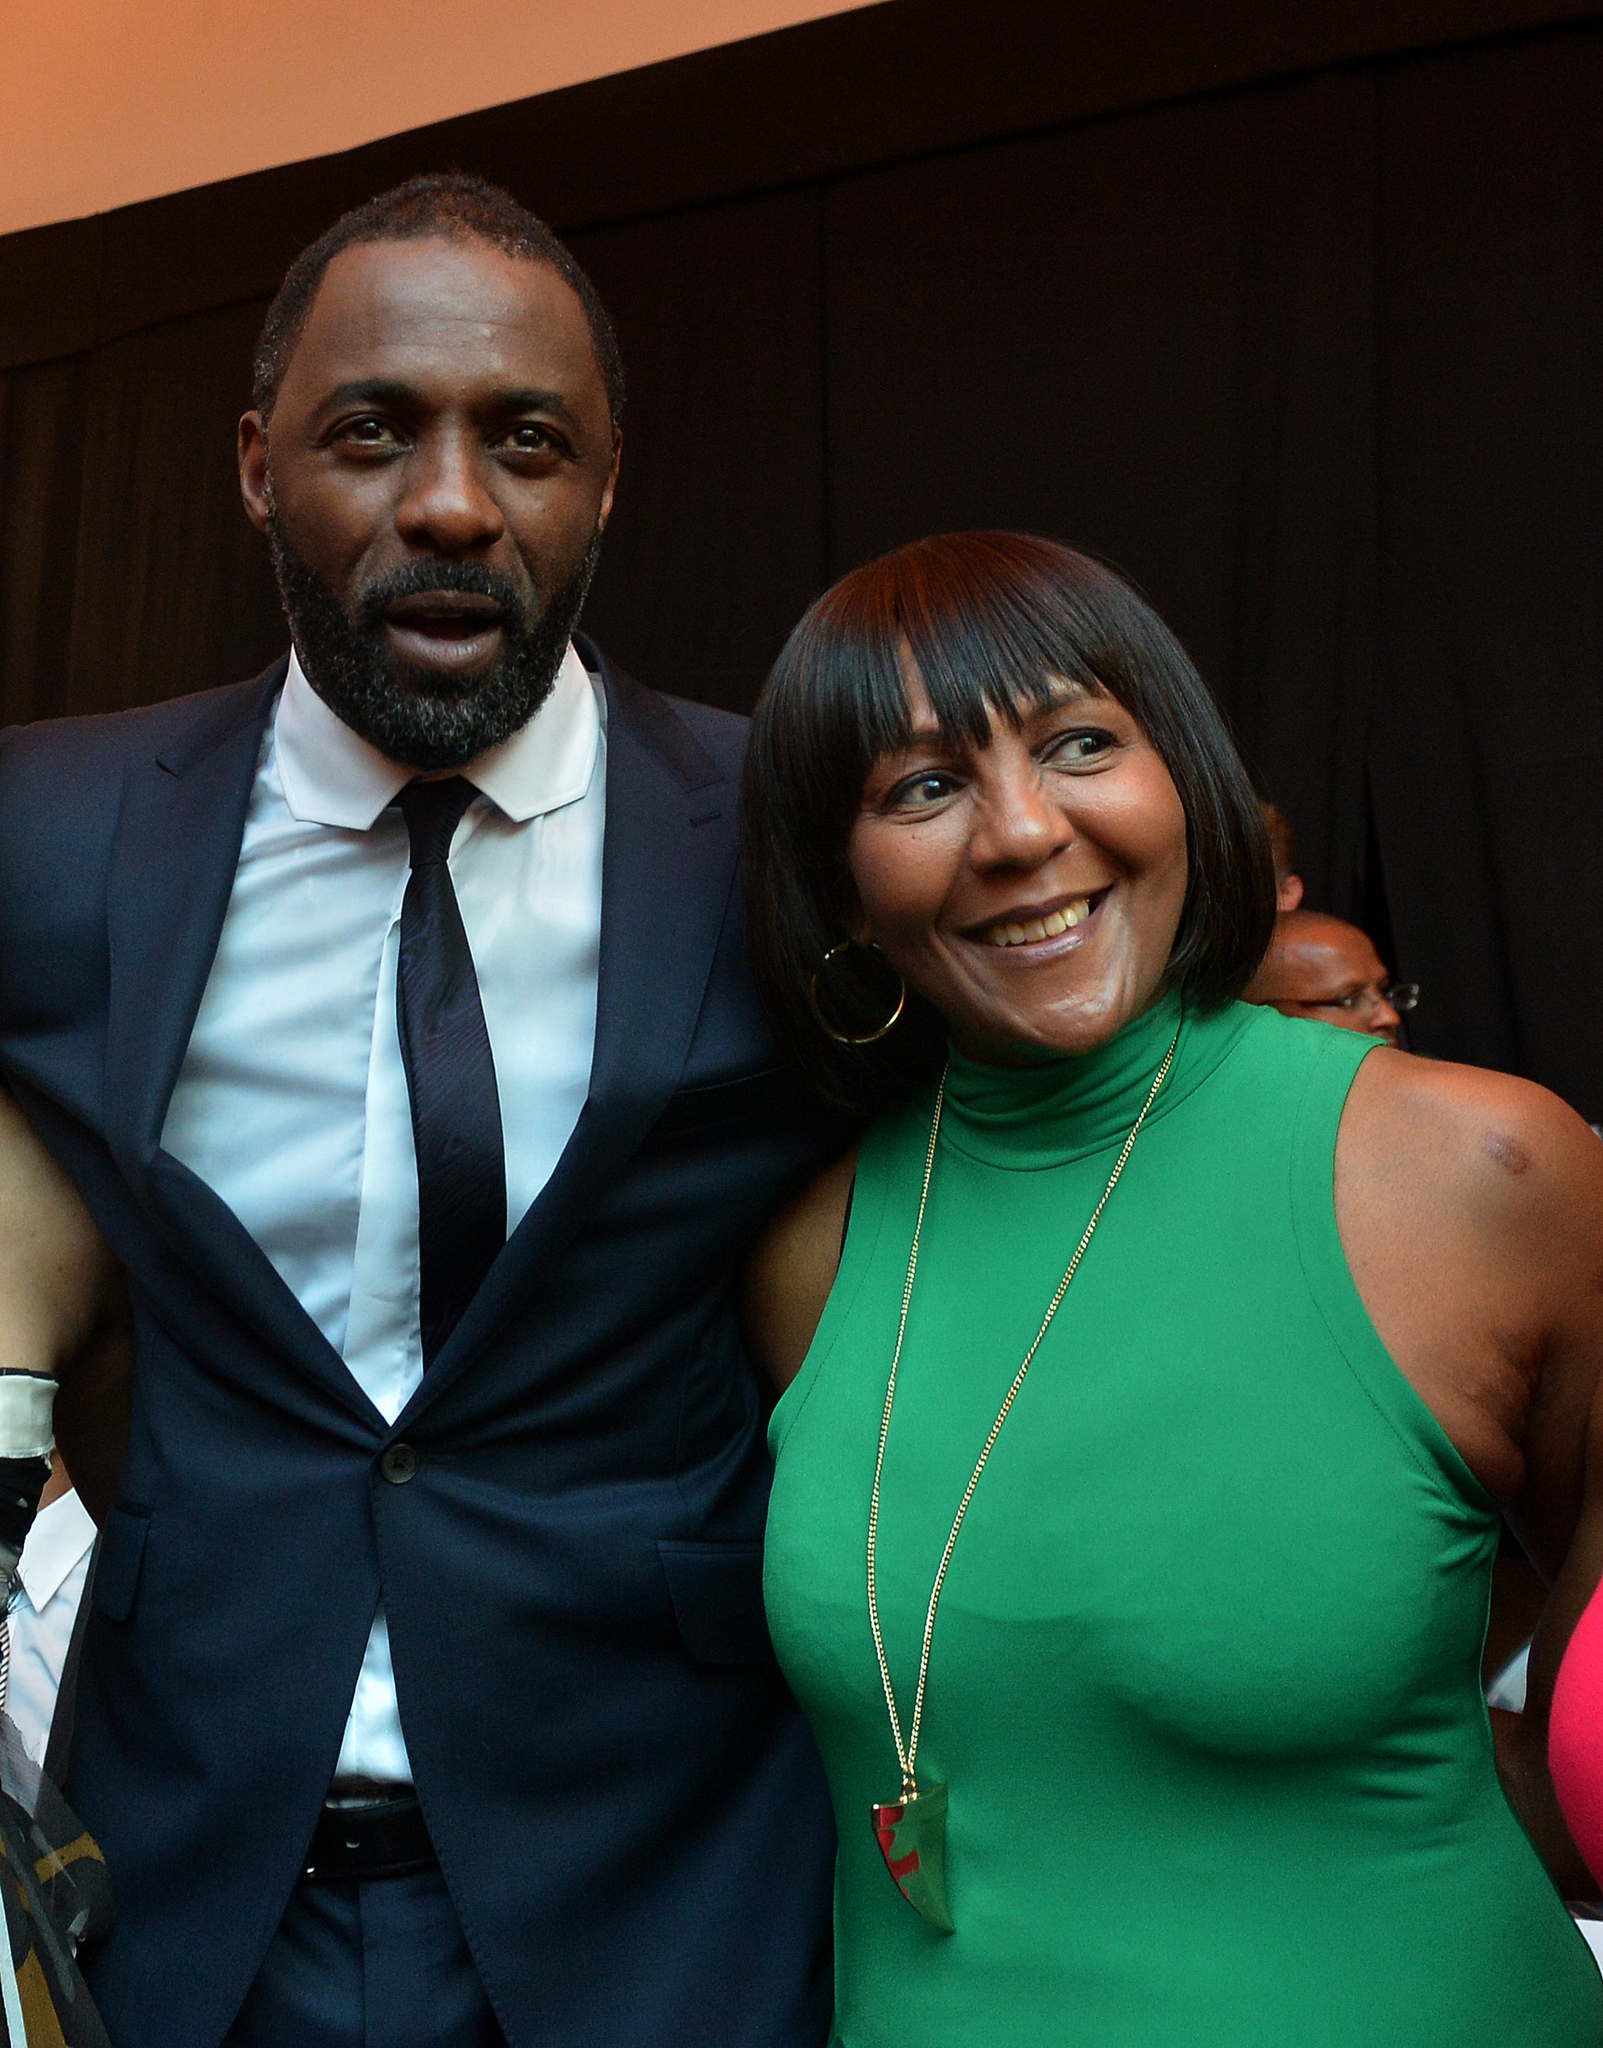 Nelson Mandela's daughter Makaziwe (R) and British actor Idris Elba, who plays the role of Nelson Mandela in the movie 